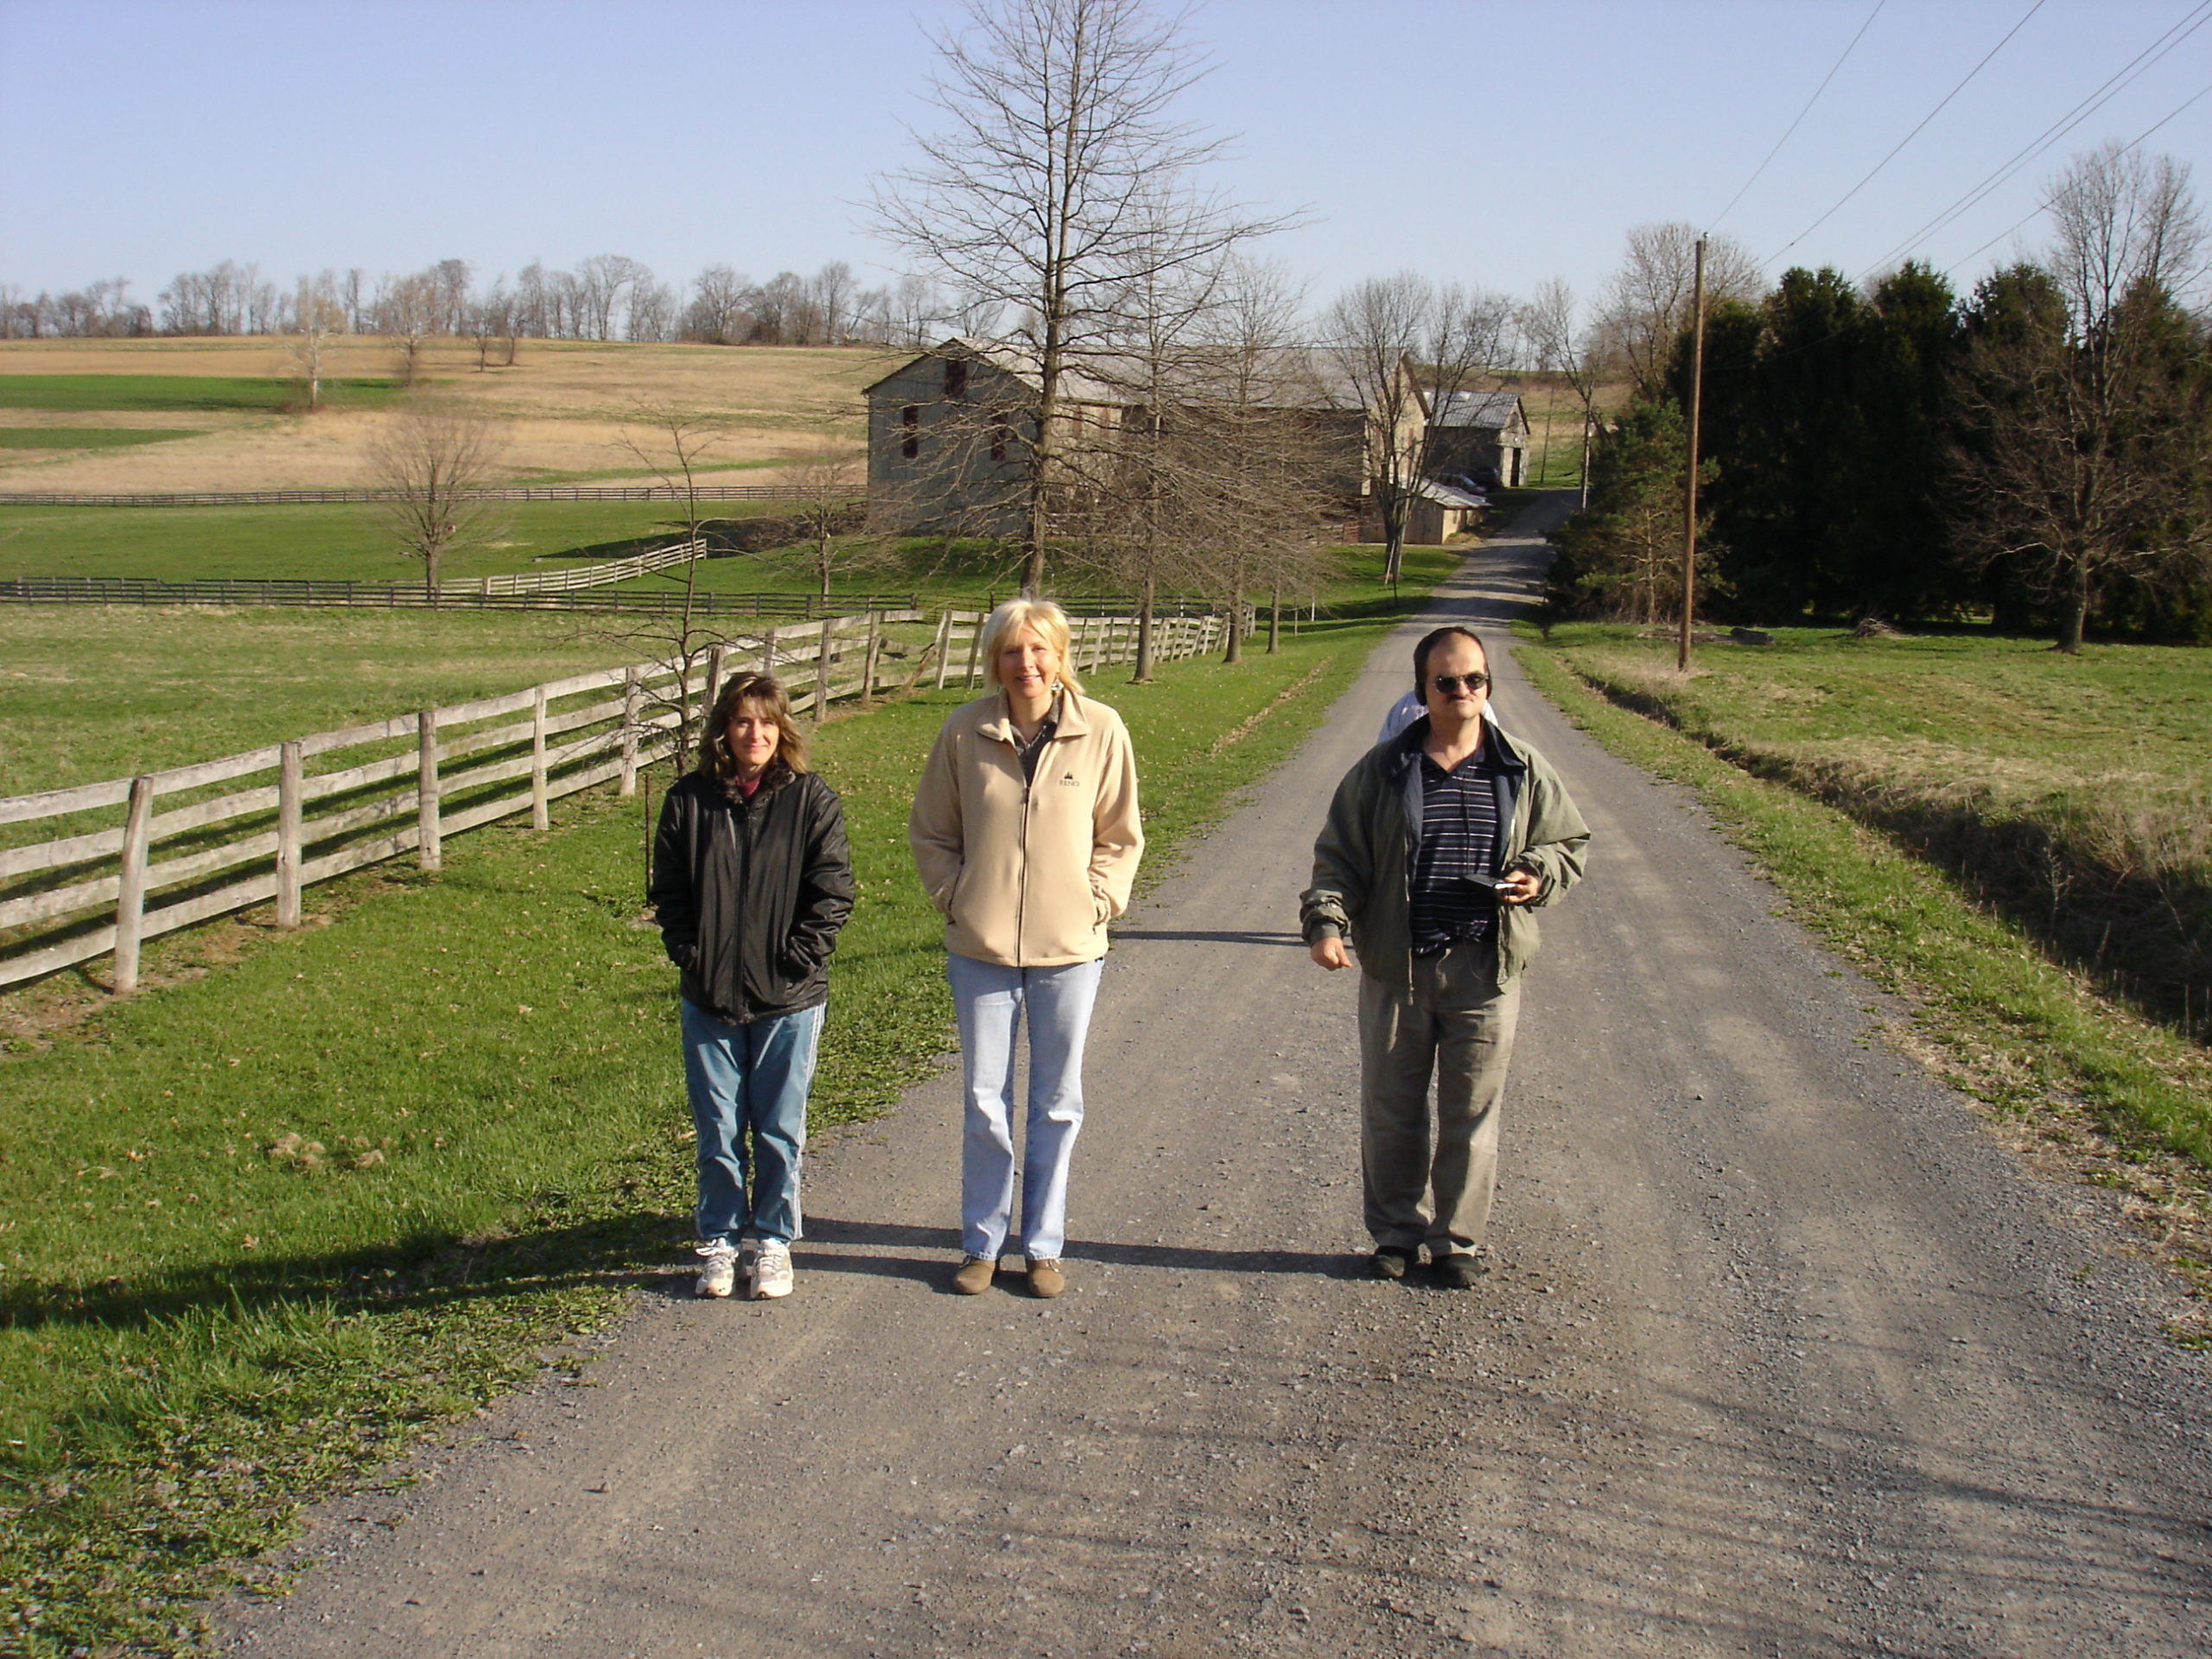 Michelle, Donna, & George take time for a walk during the retreat